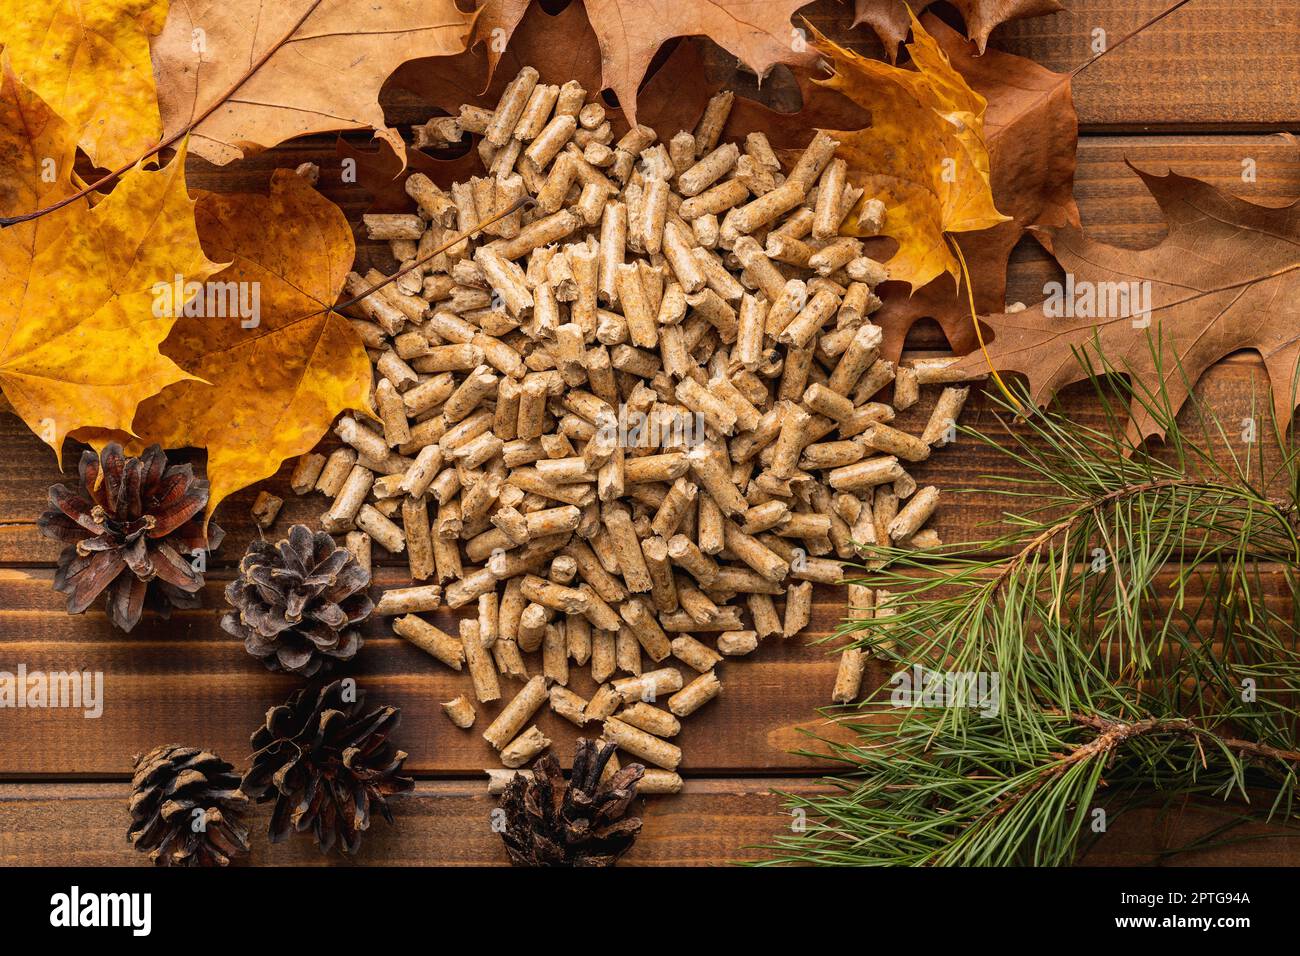 Wooden pellets on the wooden table. Top view. Stock Photo